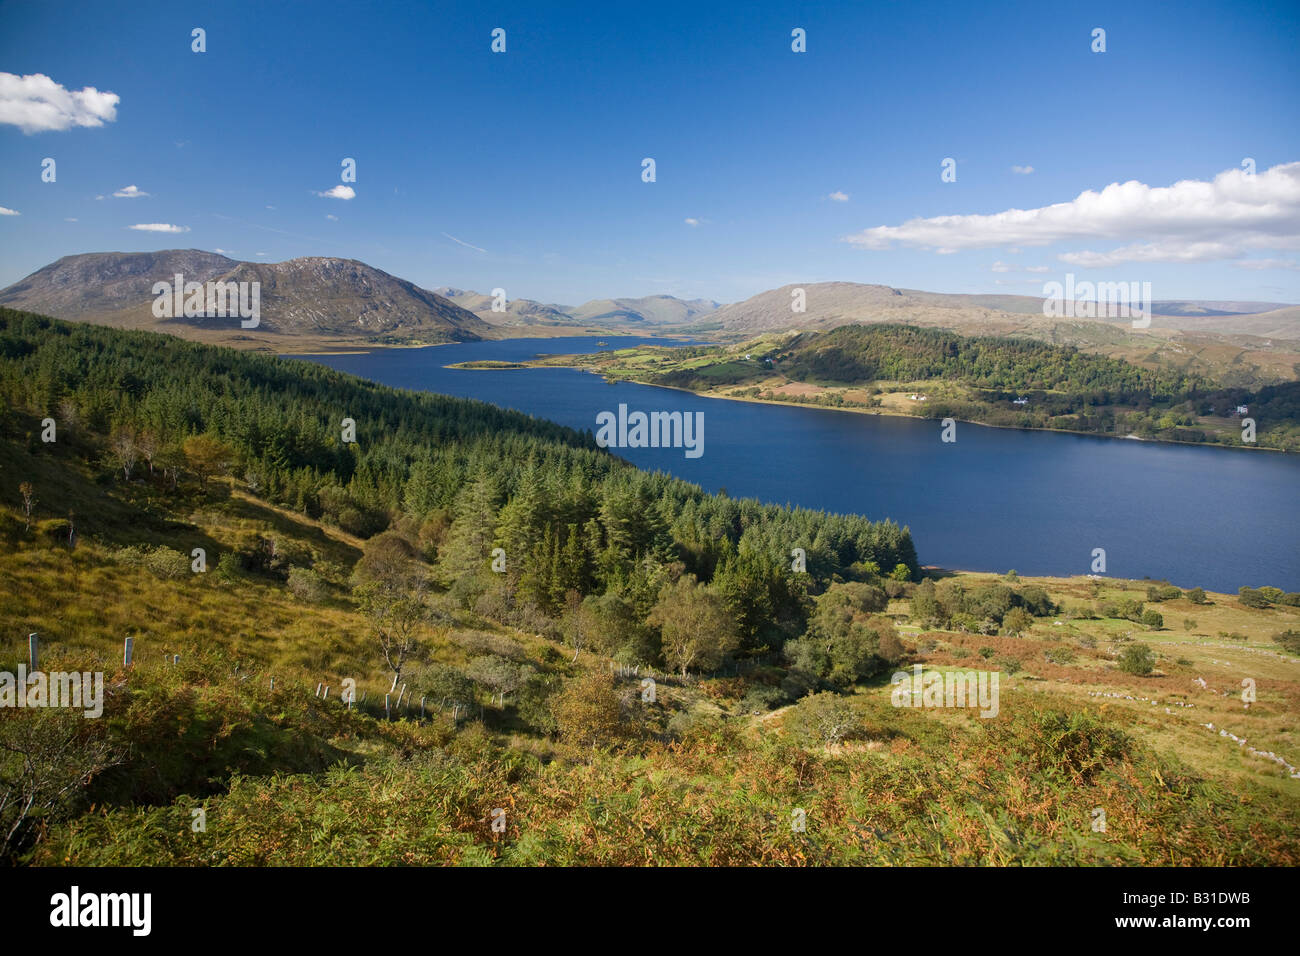 View over Lough Corrib and Lackavrea mountain, County Galway, Ireland. Stock Photo